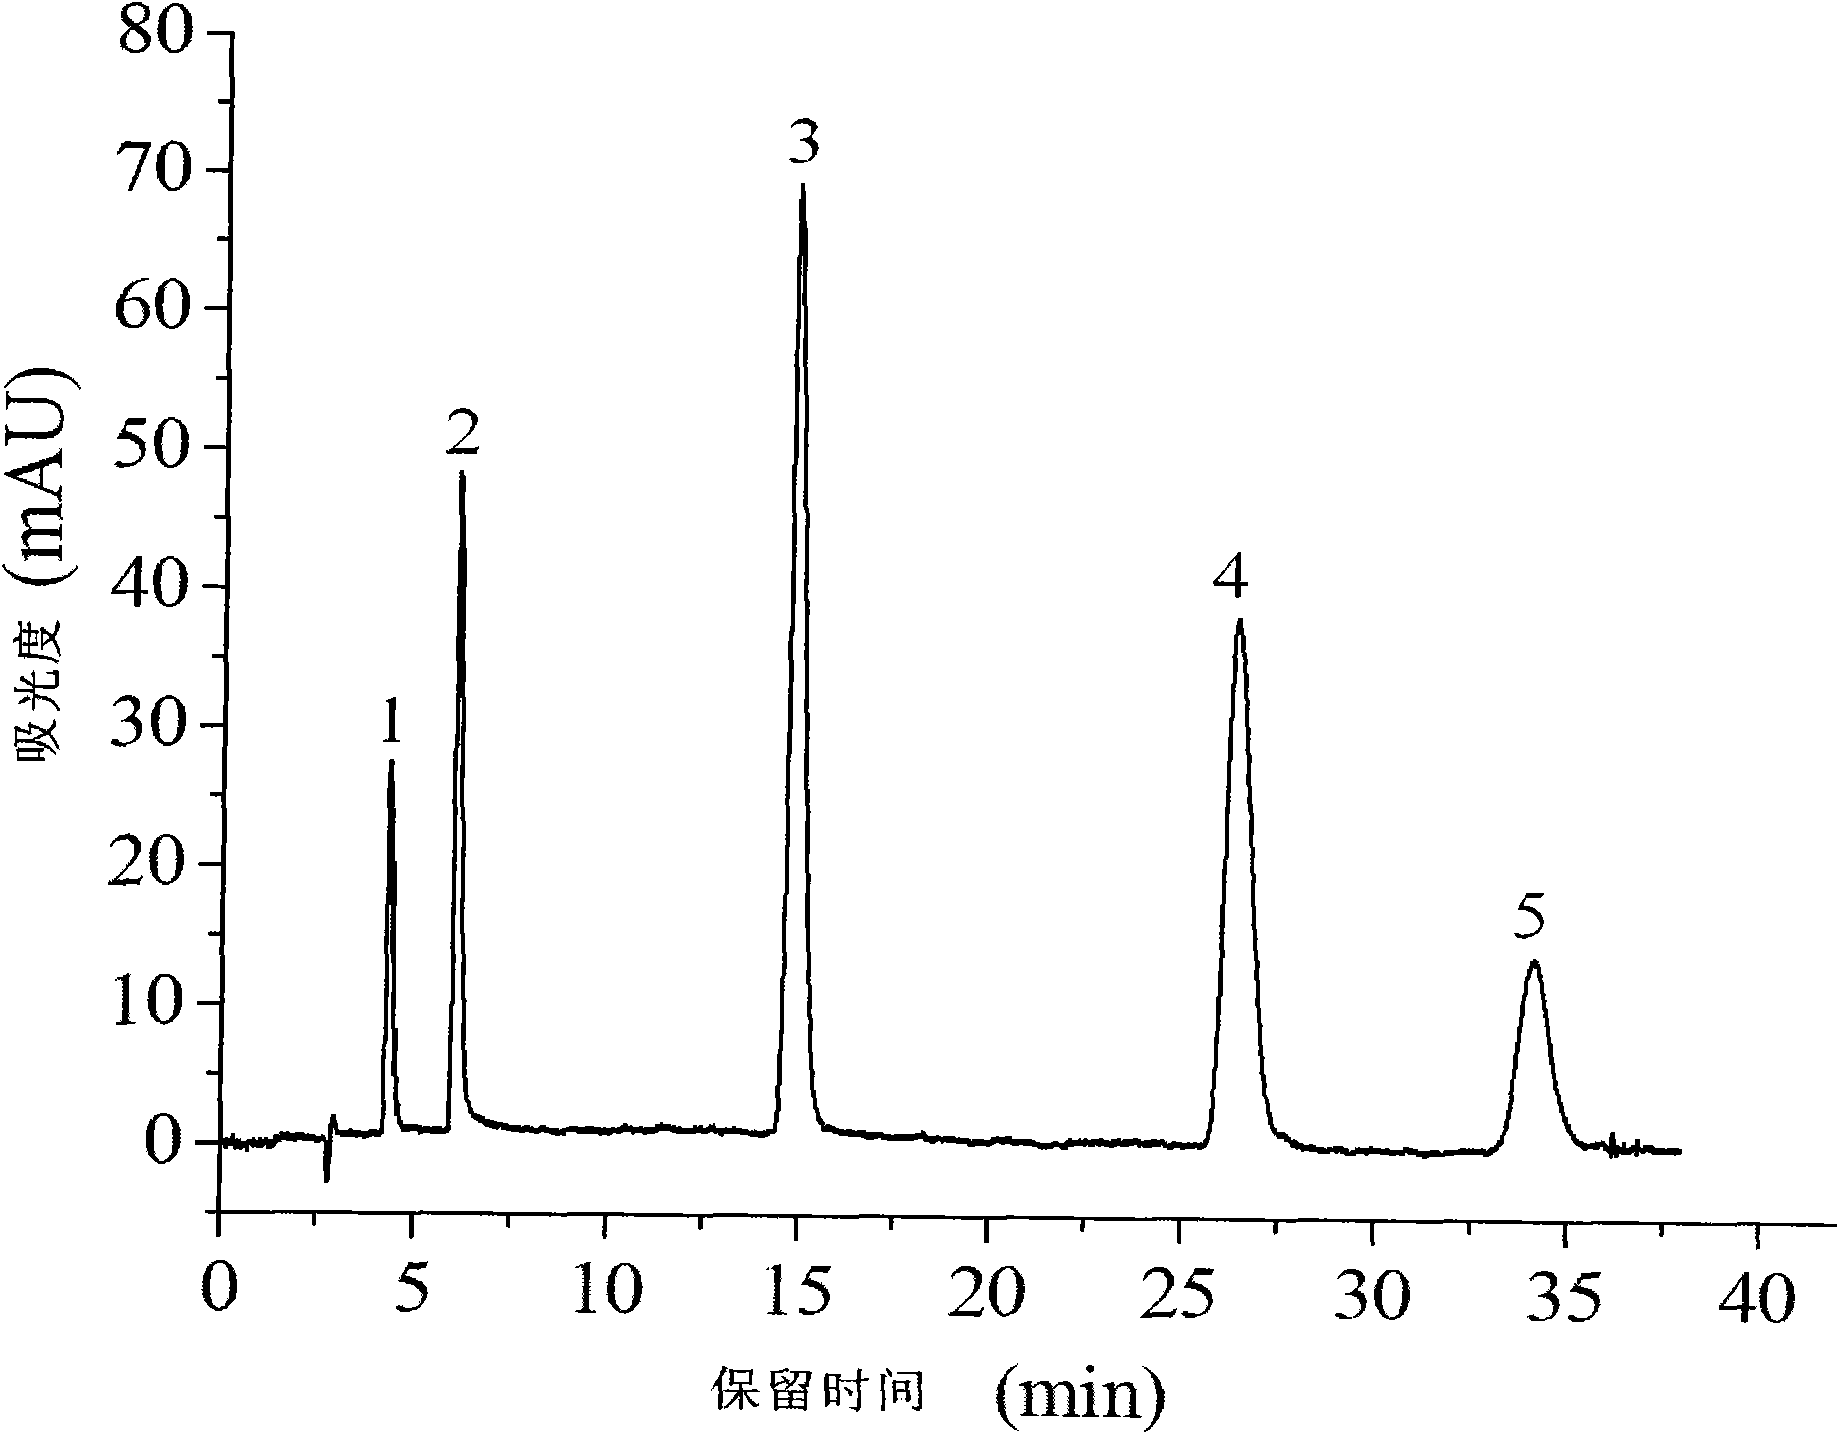 Compound for ultraviolet-detecting anions containing sulfur by ion chromatography post-column derivatization